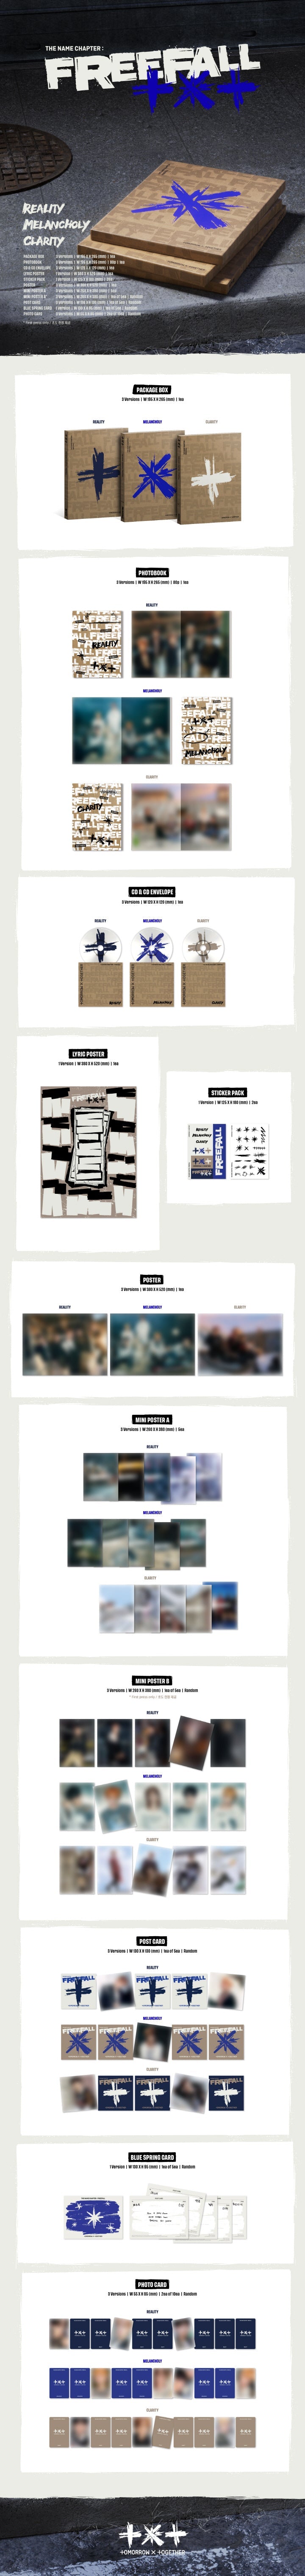 1 CD
1 Photo Book (80 pages)
1 Lyric Poster
2 Stickers
1 Folded Poster
5 Mini Posters A
1 Postcard (random out of 5 types)...